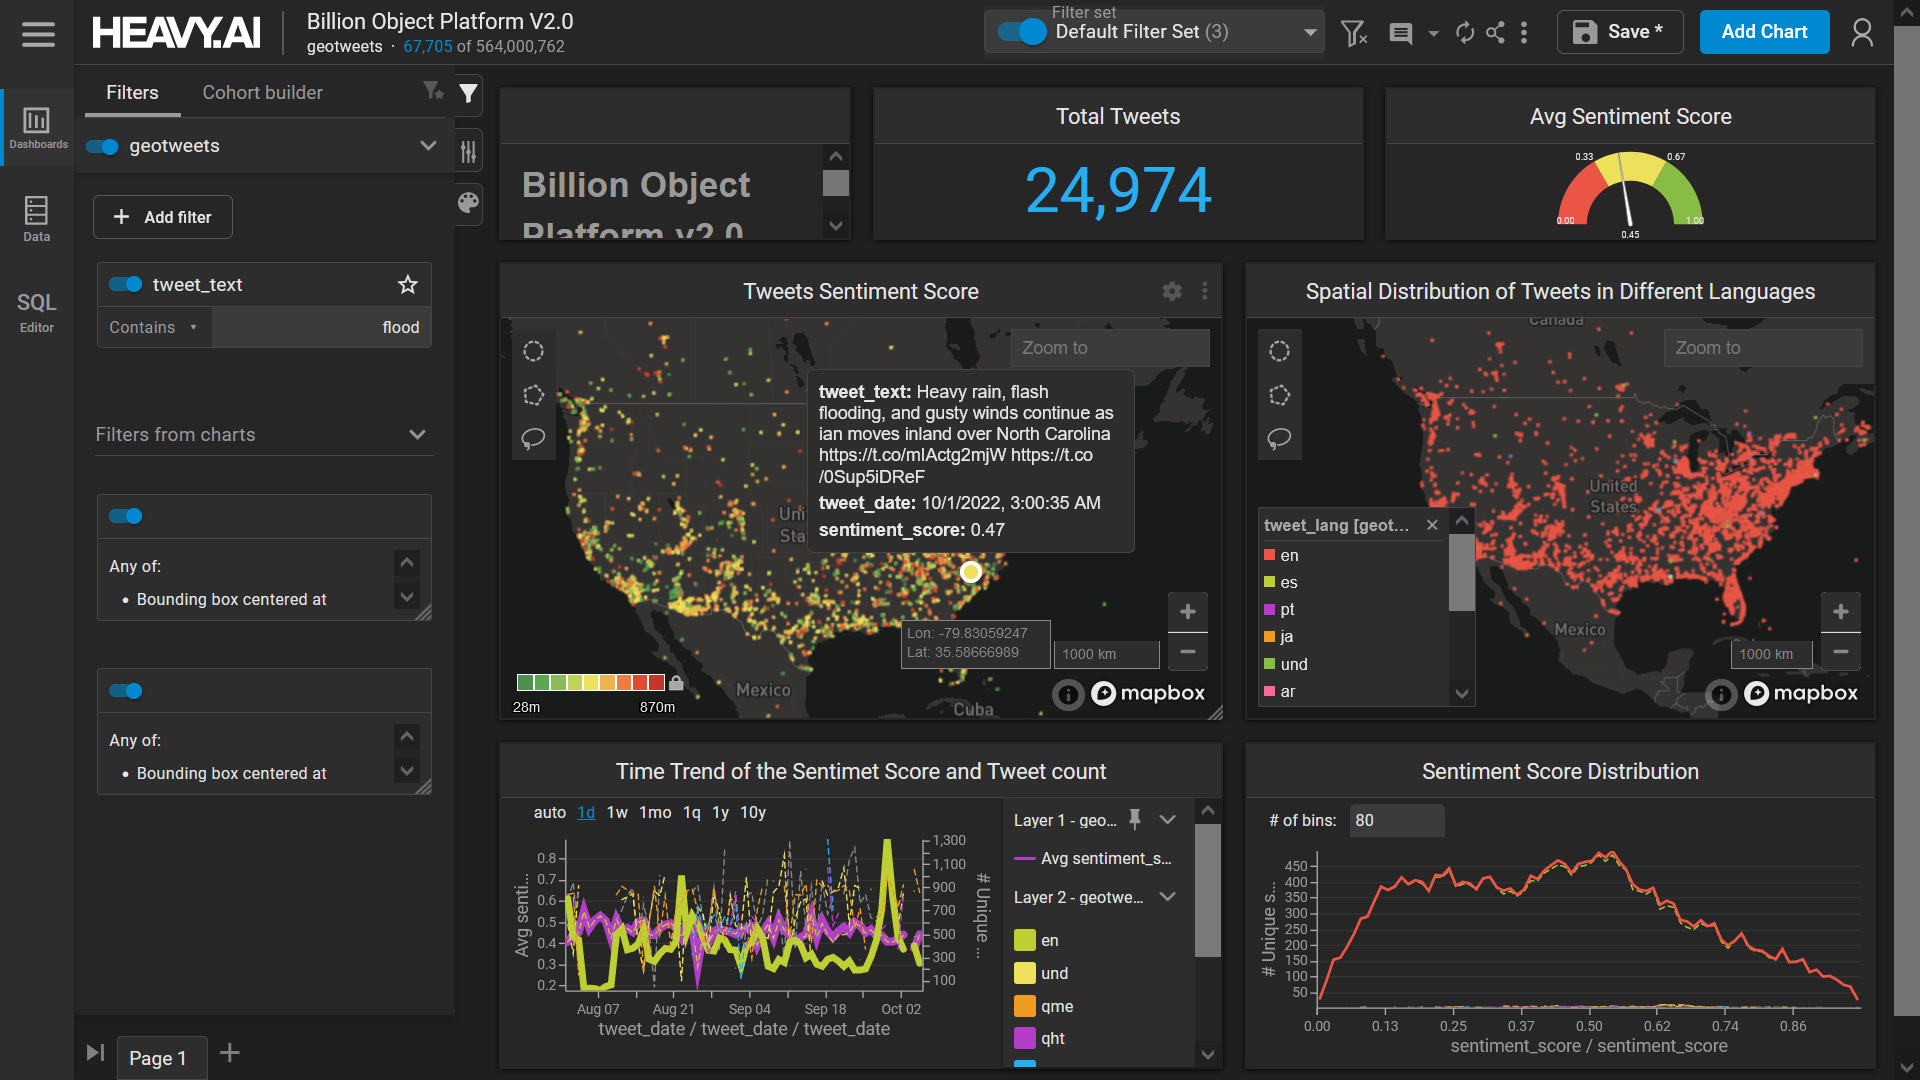 Geo-social Media Dashboard showing the toal number of tweets, the average sentiment score, the spatial distribution of tweets and trends